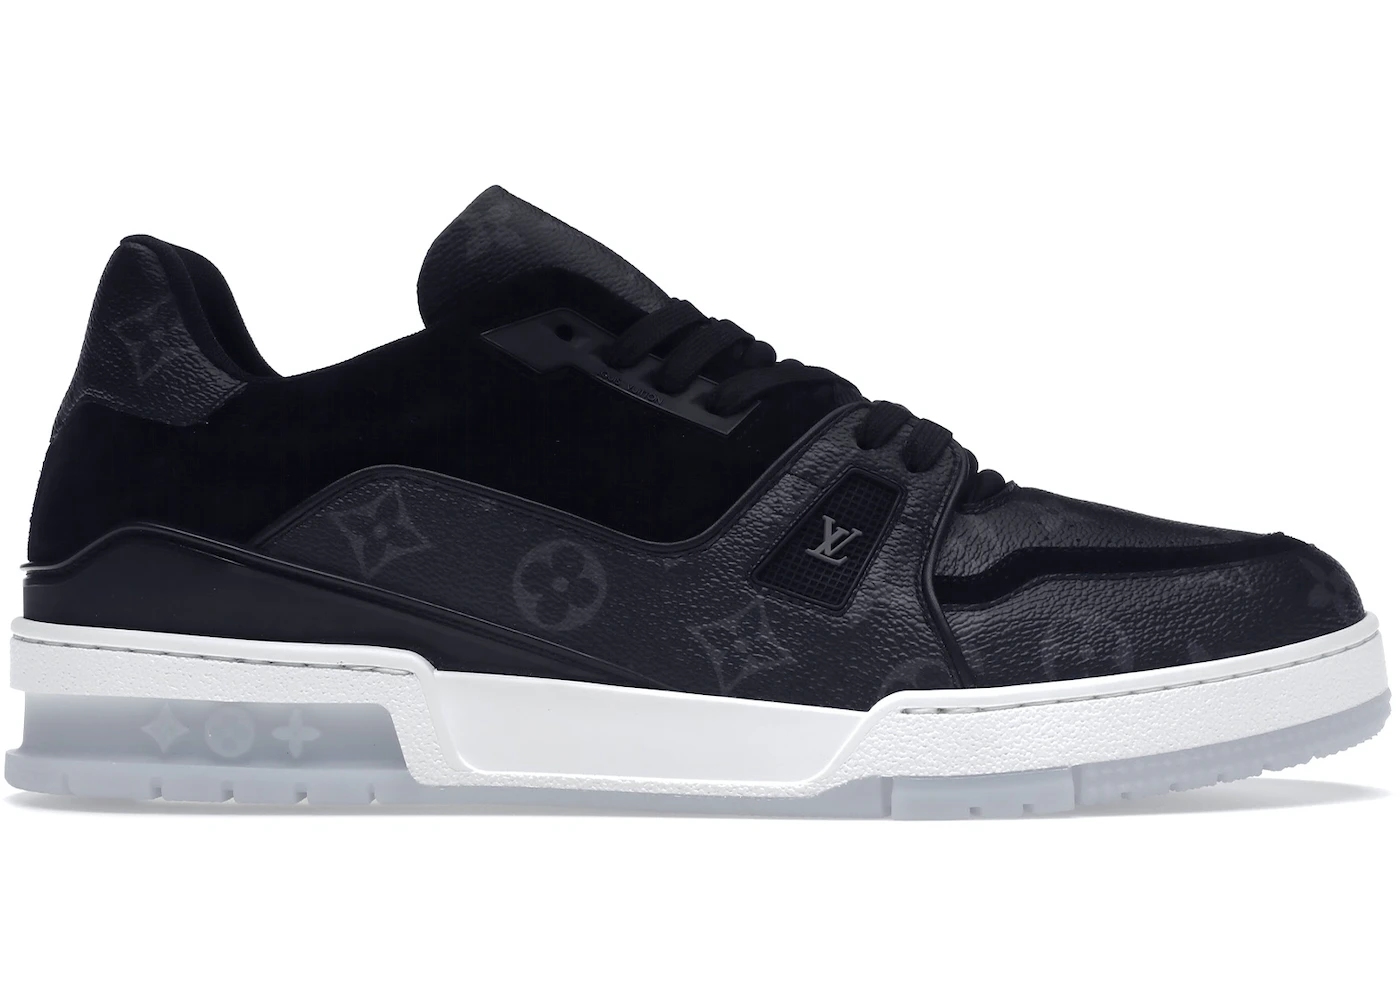 louis vuitton trainer sneaker black and white